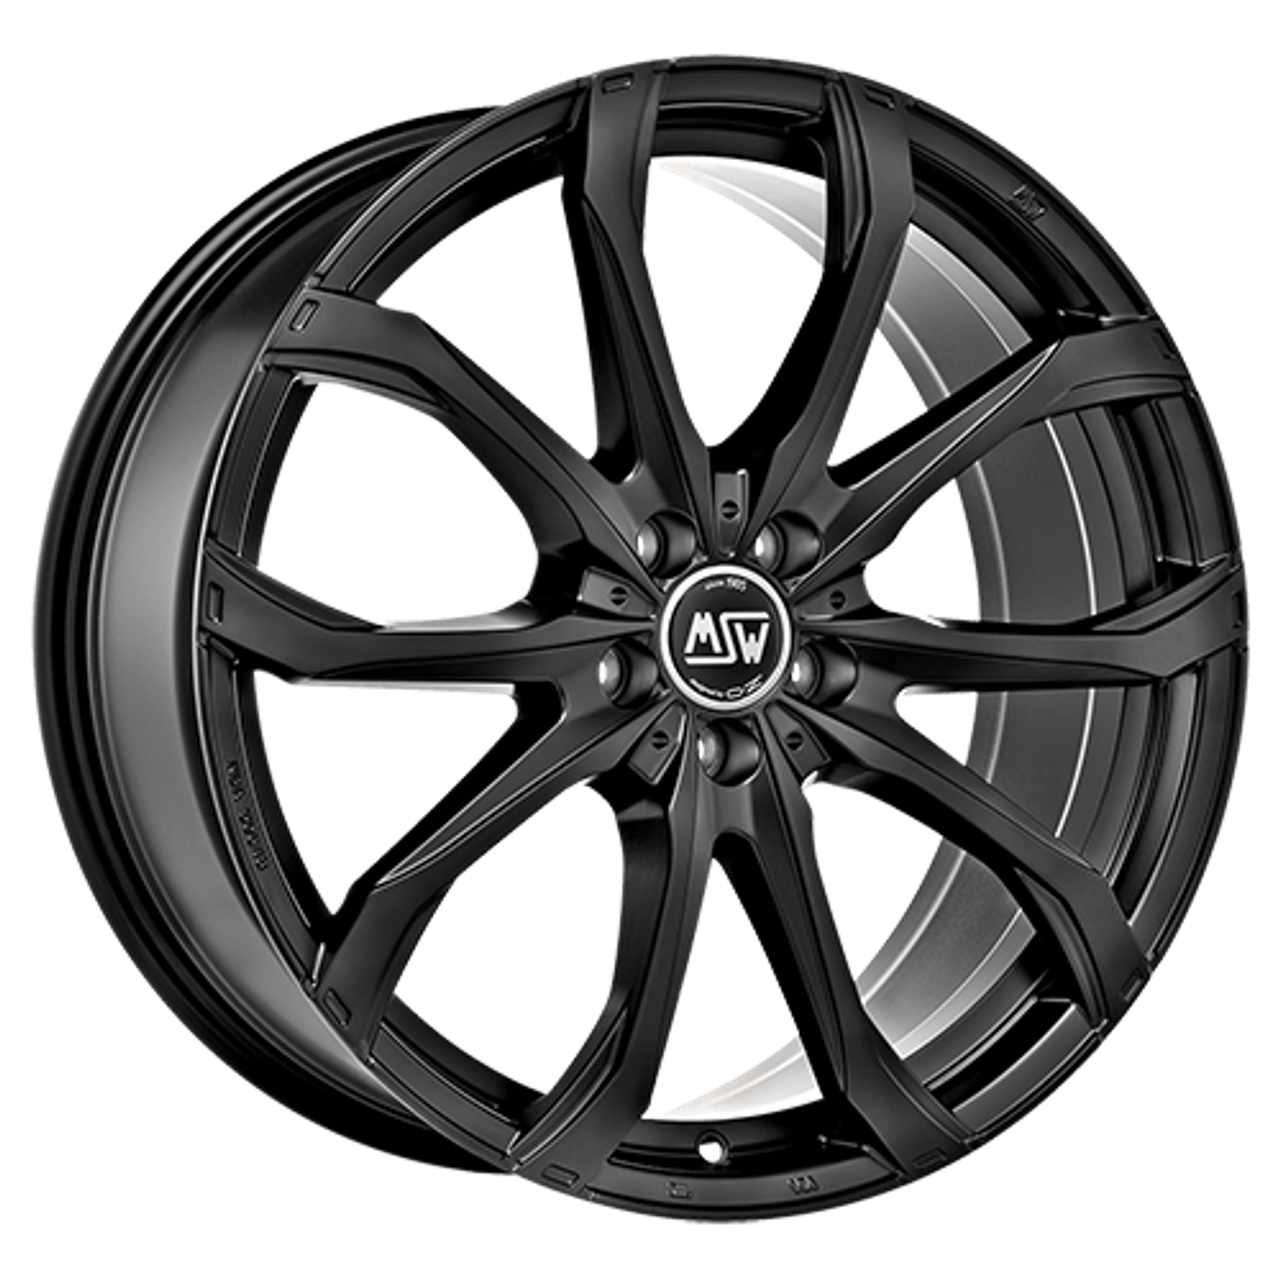 MSW (OZ) MSW 48 gloss black full polished 7.5Jx17 5x120 ET50